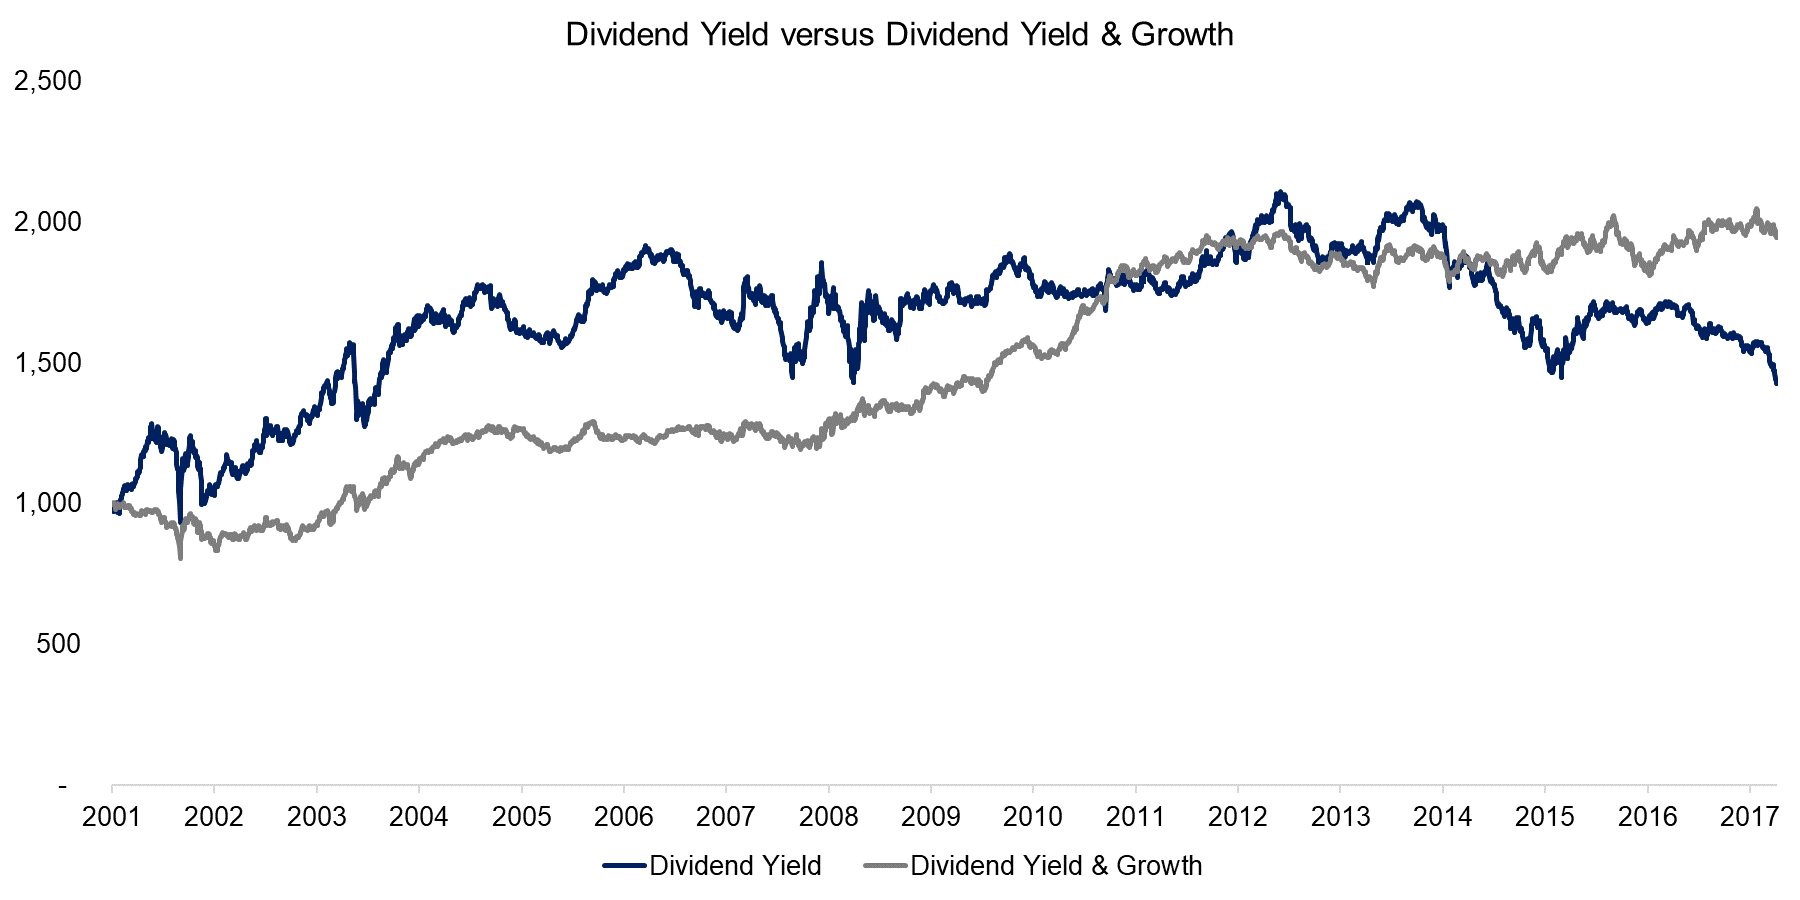 Dividend Yield versus Dividend Yield & Growth